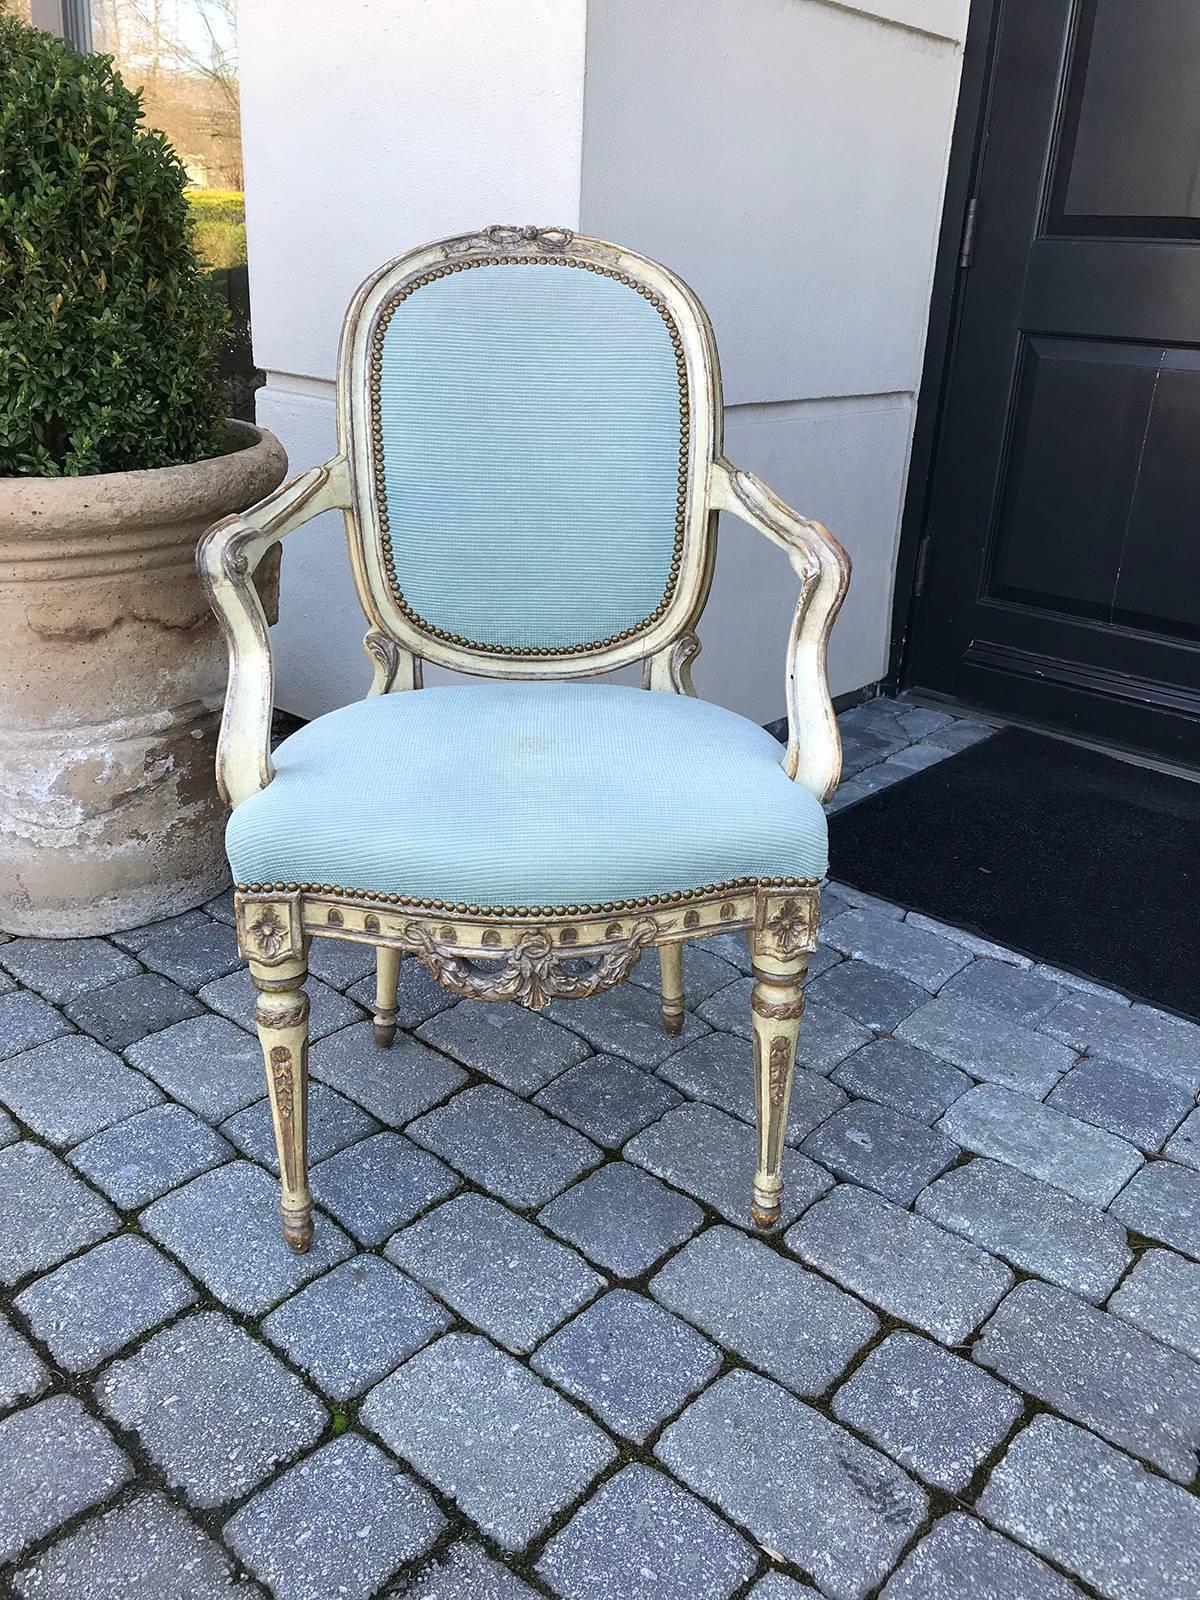 20th Century Italian Carved & Painted Arm Chair
23